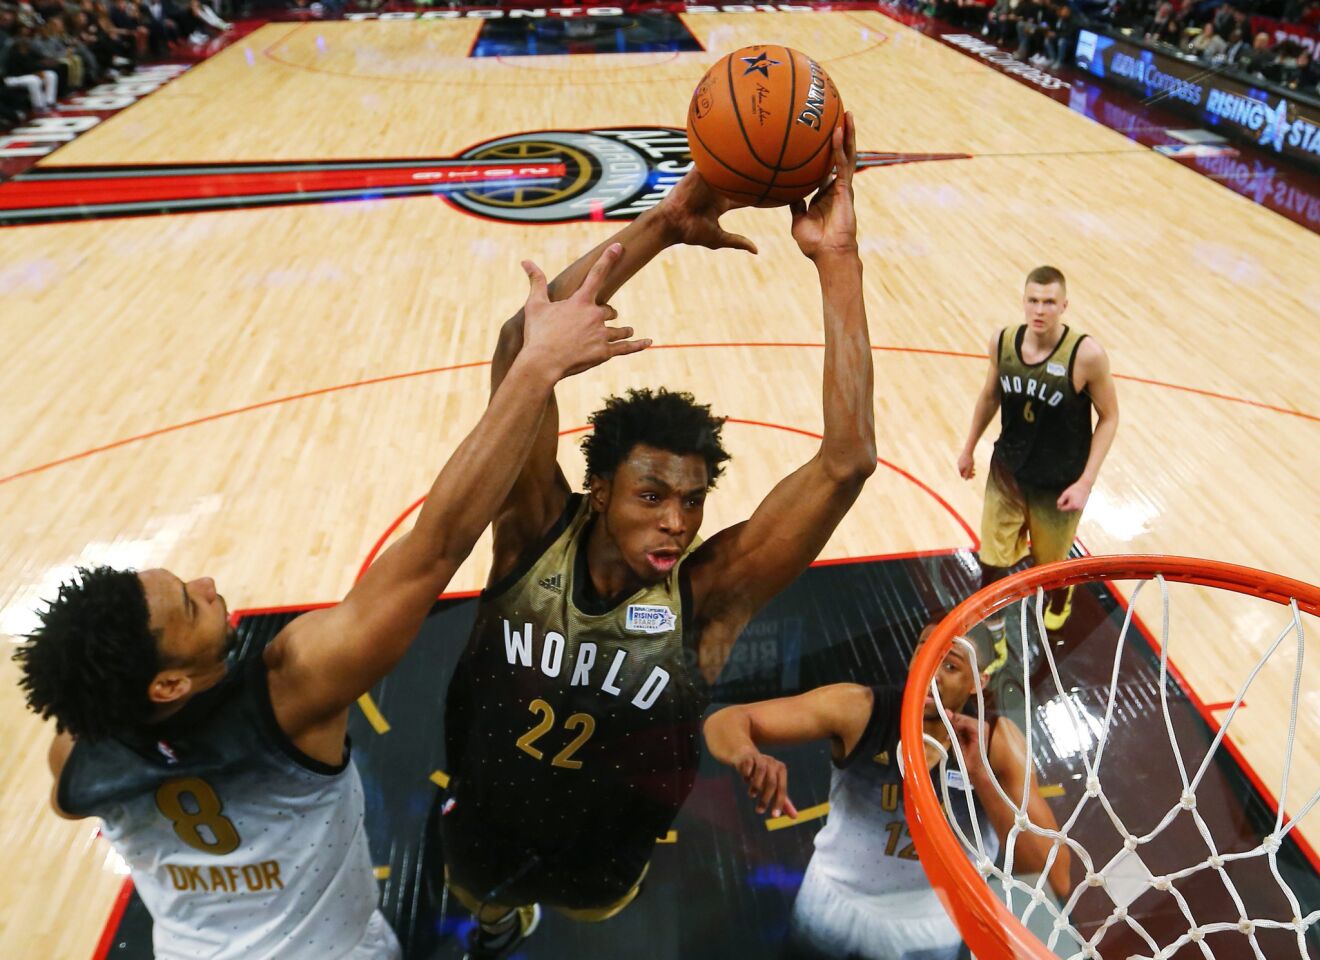 76ers forward Jahlil Okafor of the U.S. team tries to block a shot by Timberwolves forward Andrew Wigging of the World team during the Rising Stars Challenge.